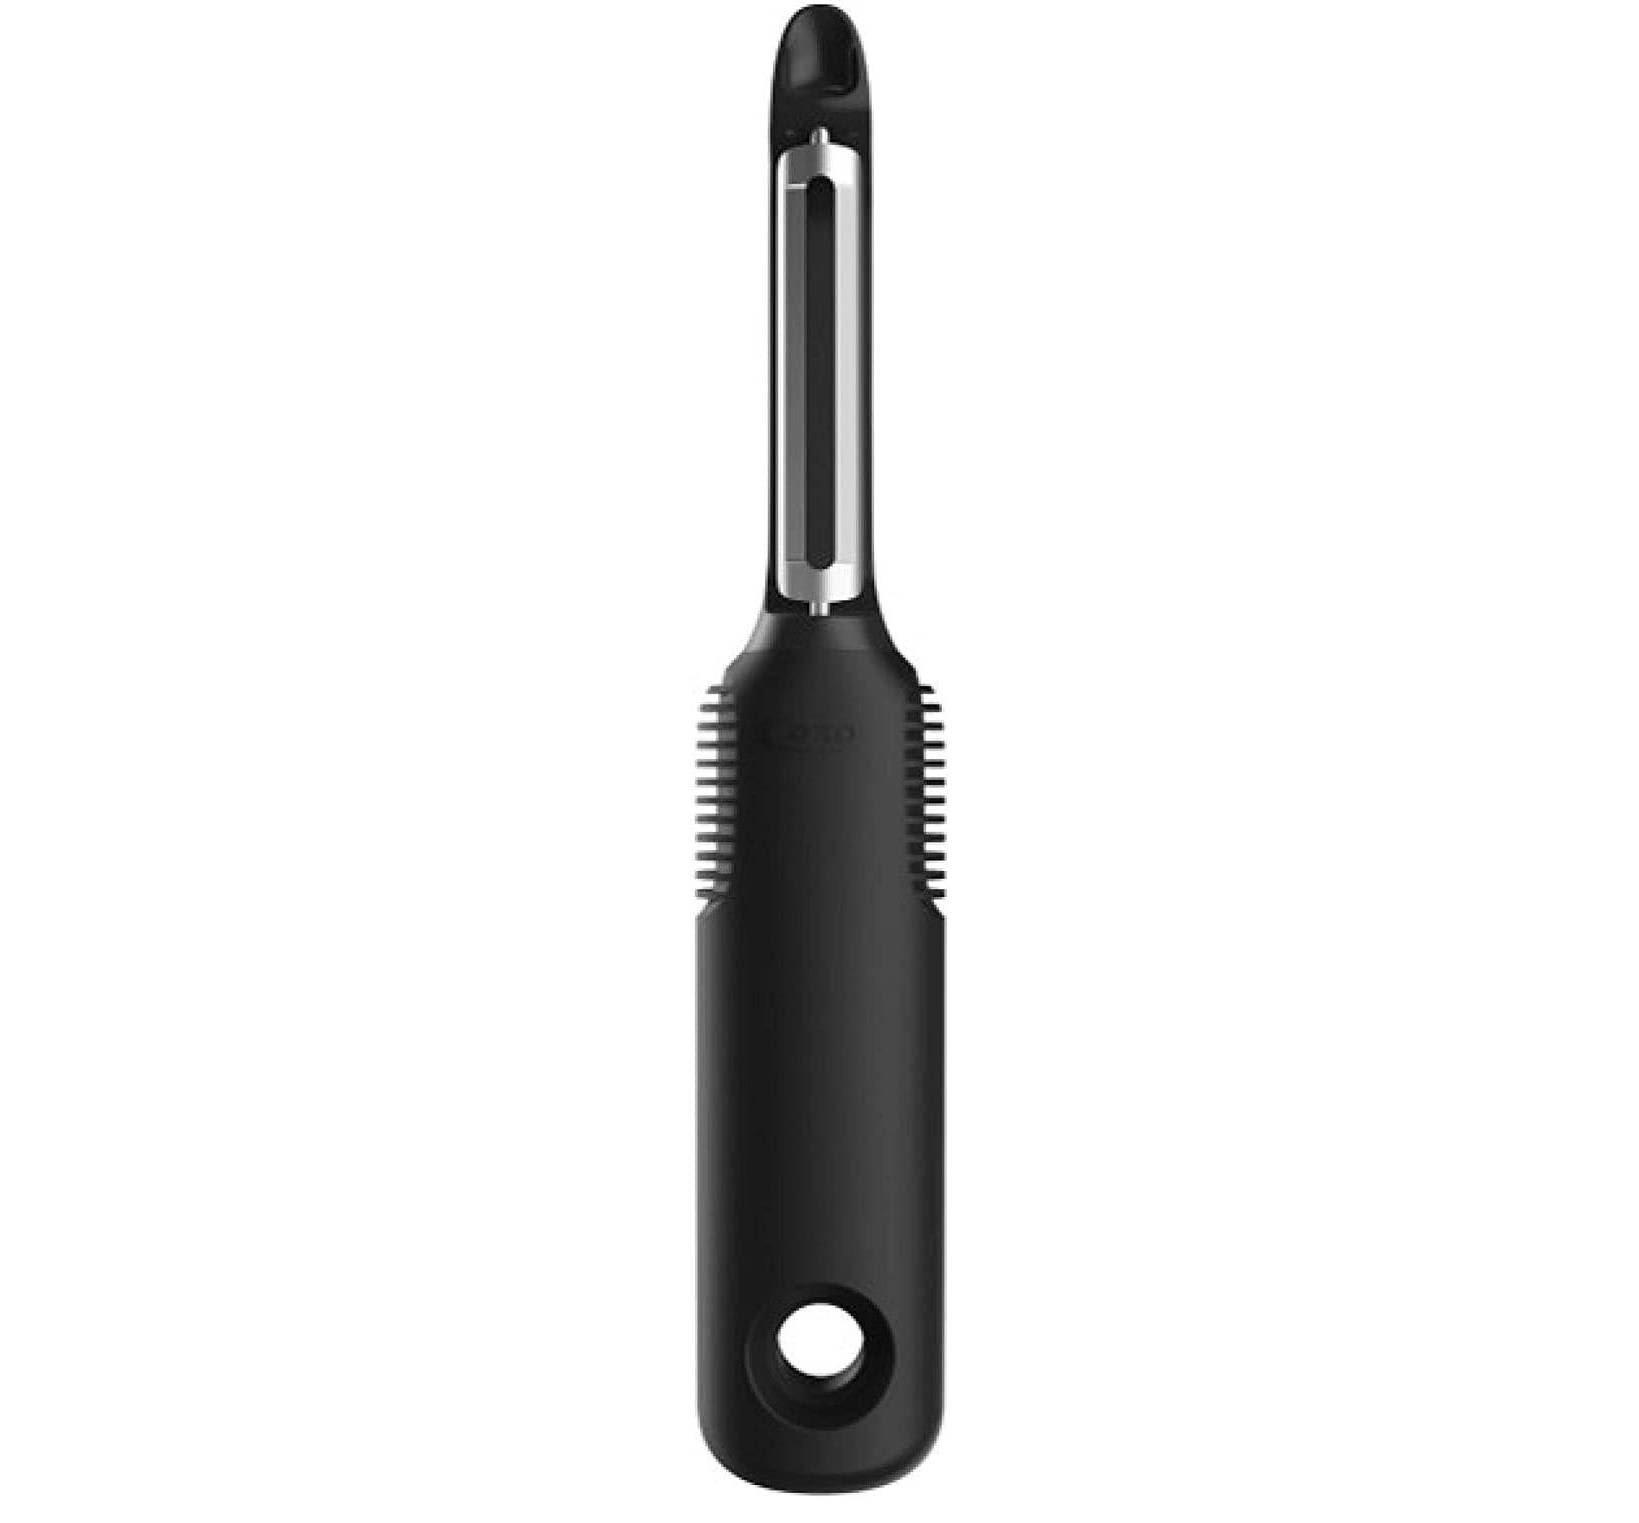 Oxo Good Grips Kitchen Utensils and Gadgets